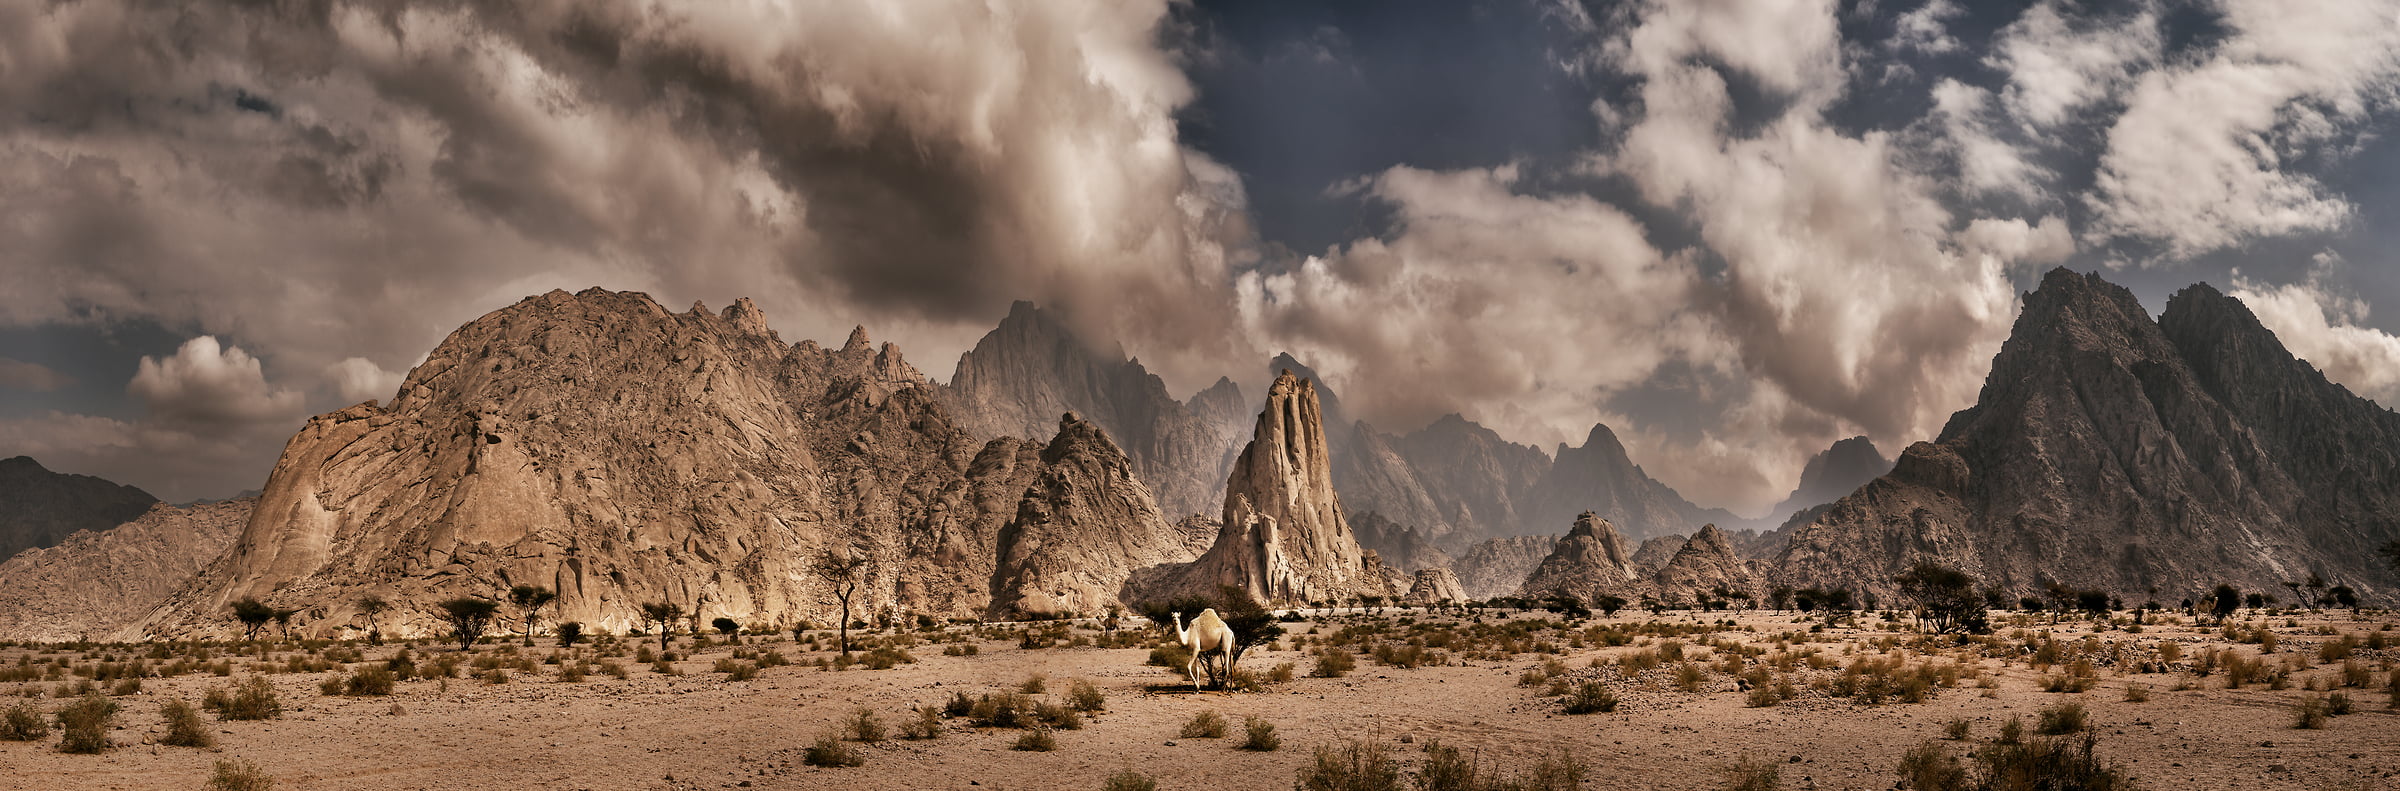 216 megapixels! A very high resolution, large-format VAST photo print of a desert landscape with a camel and mountains; photograph created by Peter Rodger in Tabuk, Saudi Arabia.